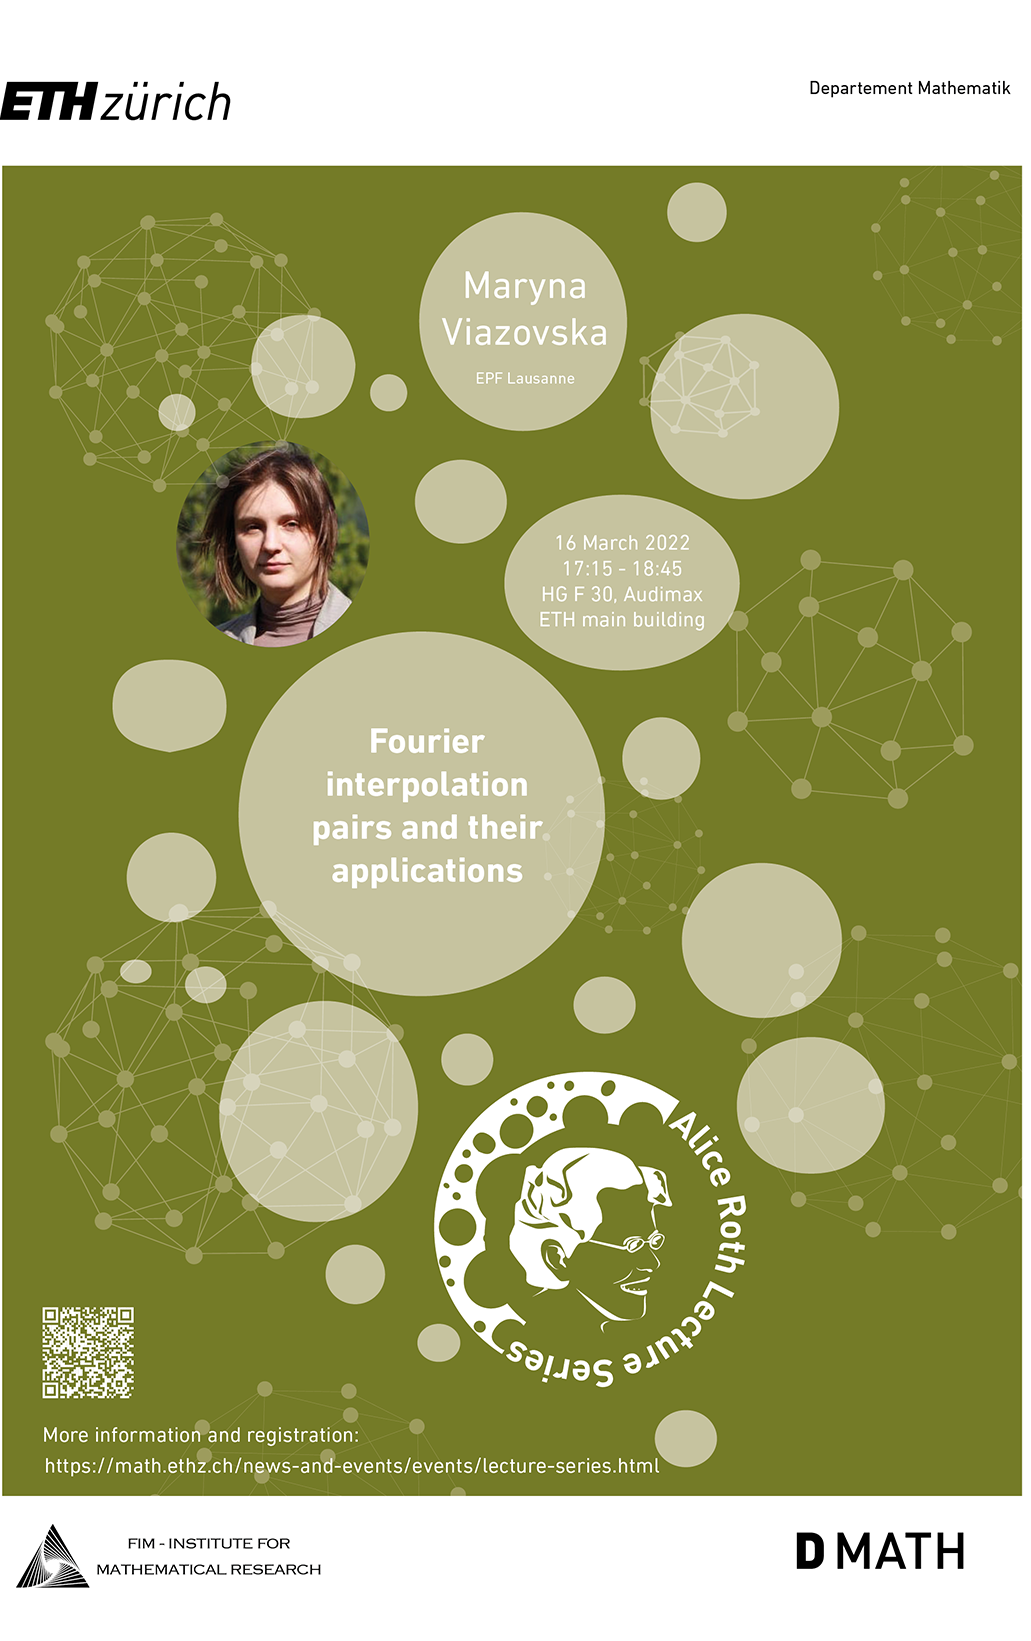 Poster with announcement of Alice Roth Lecture with Maryna Viazovska